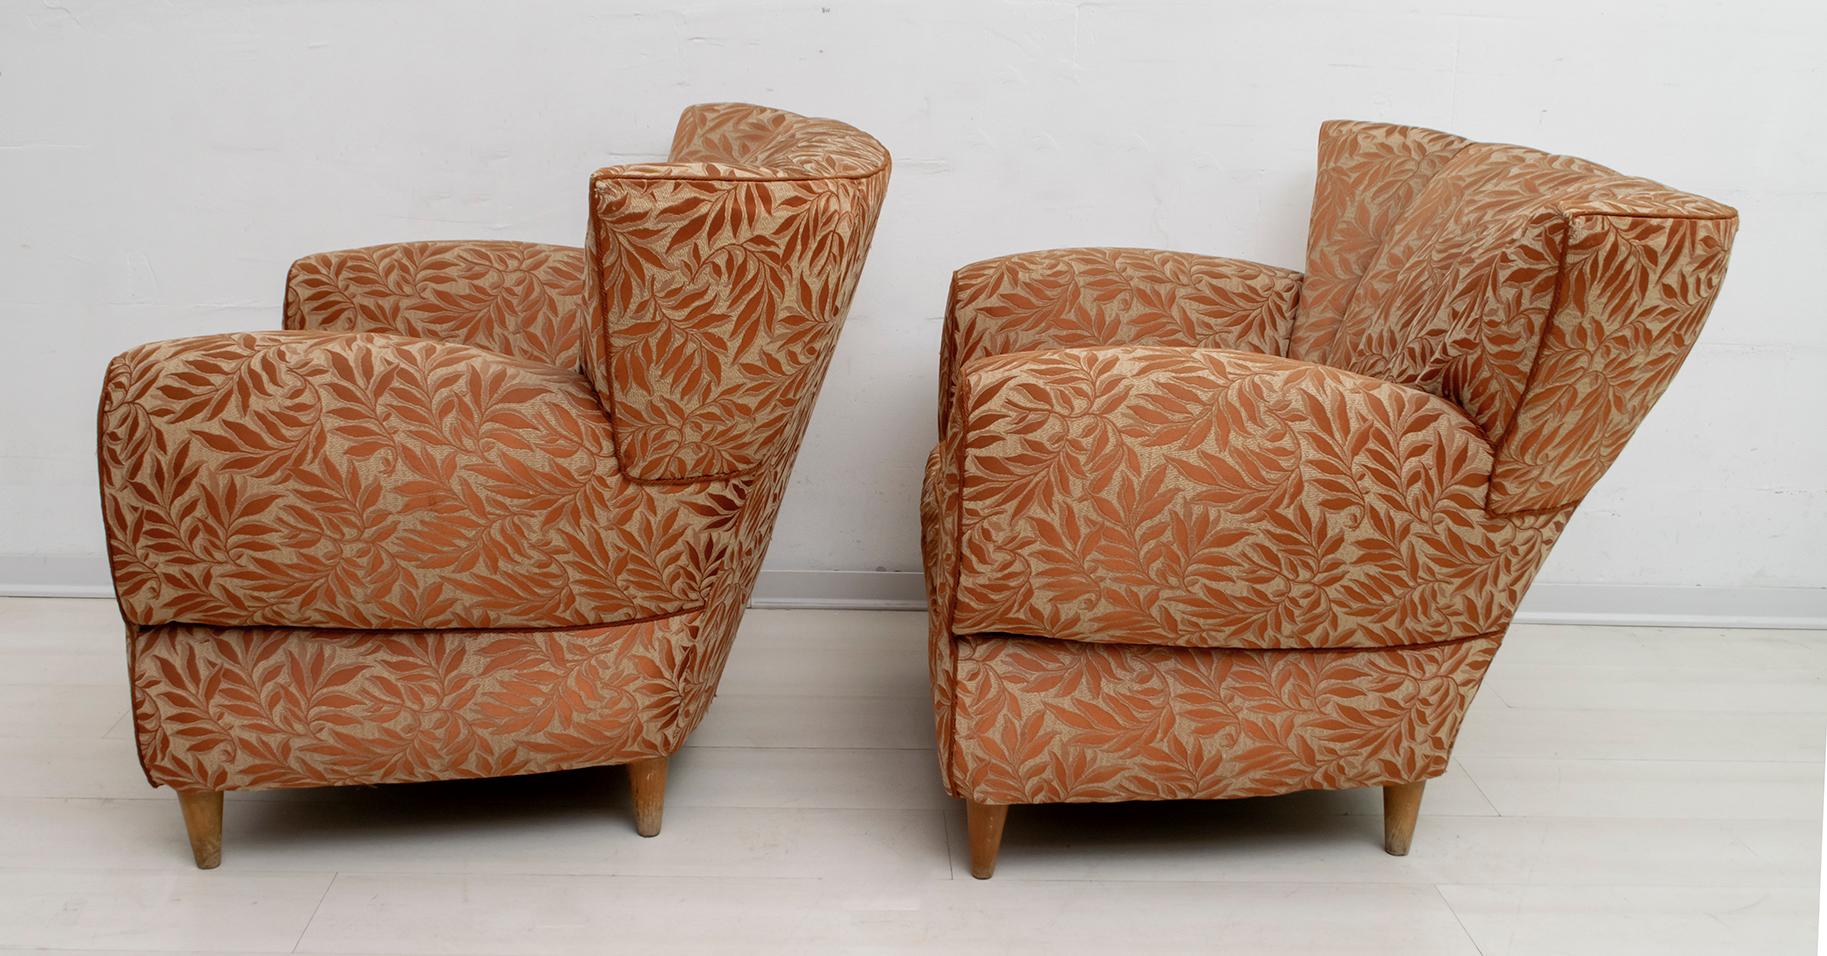 Gugliemo Ulrich Art Deco Italian Sofa and Two Armchairs, 1940s For Sale 1